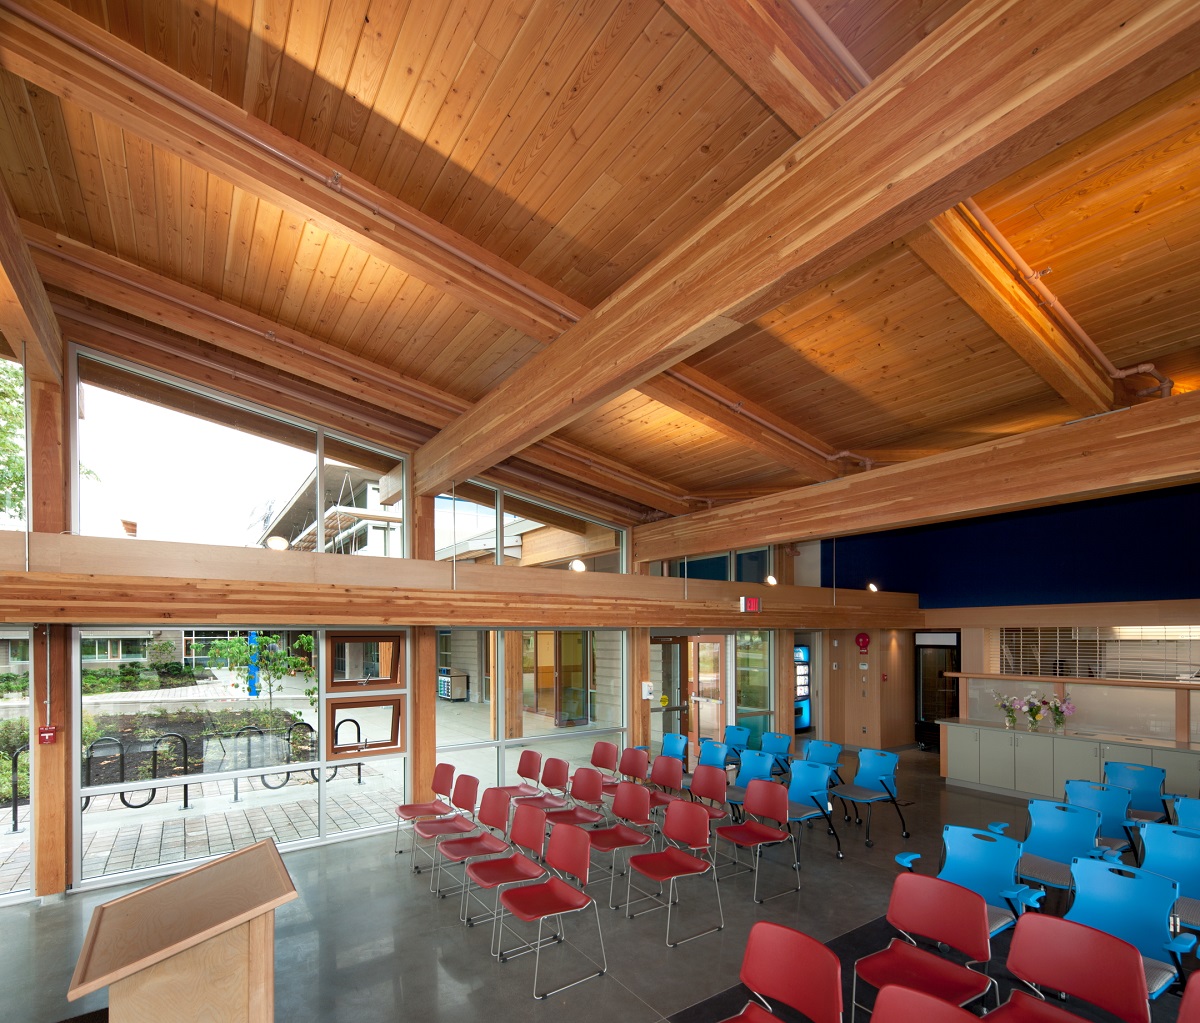 glue-laminated timber (Glulam) beams supporting tongue and groove roof lumber are all shown in this daytime interior image of the multi storey Vancouver Island University Cowichan Campus main assembly hall, complete with red and blue plastic chairs